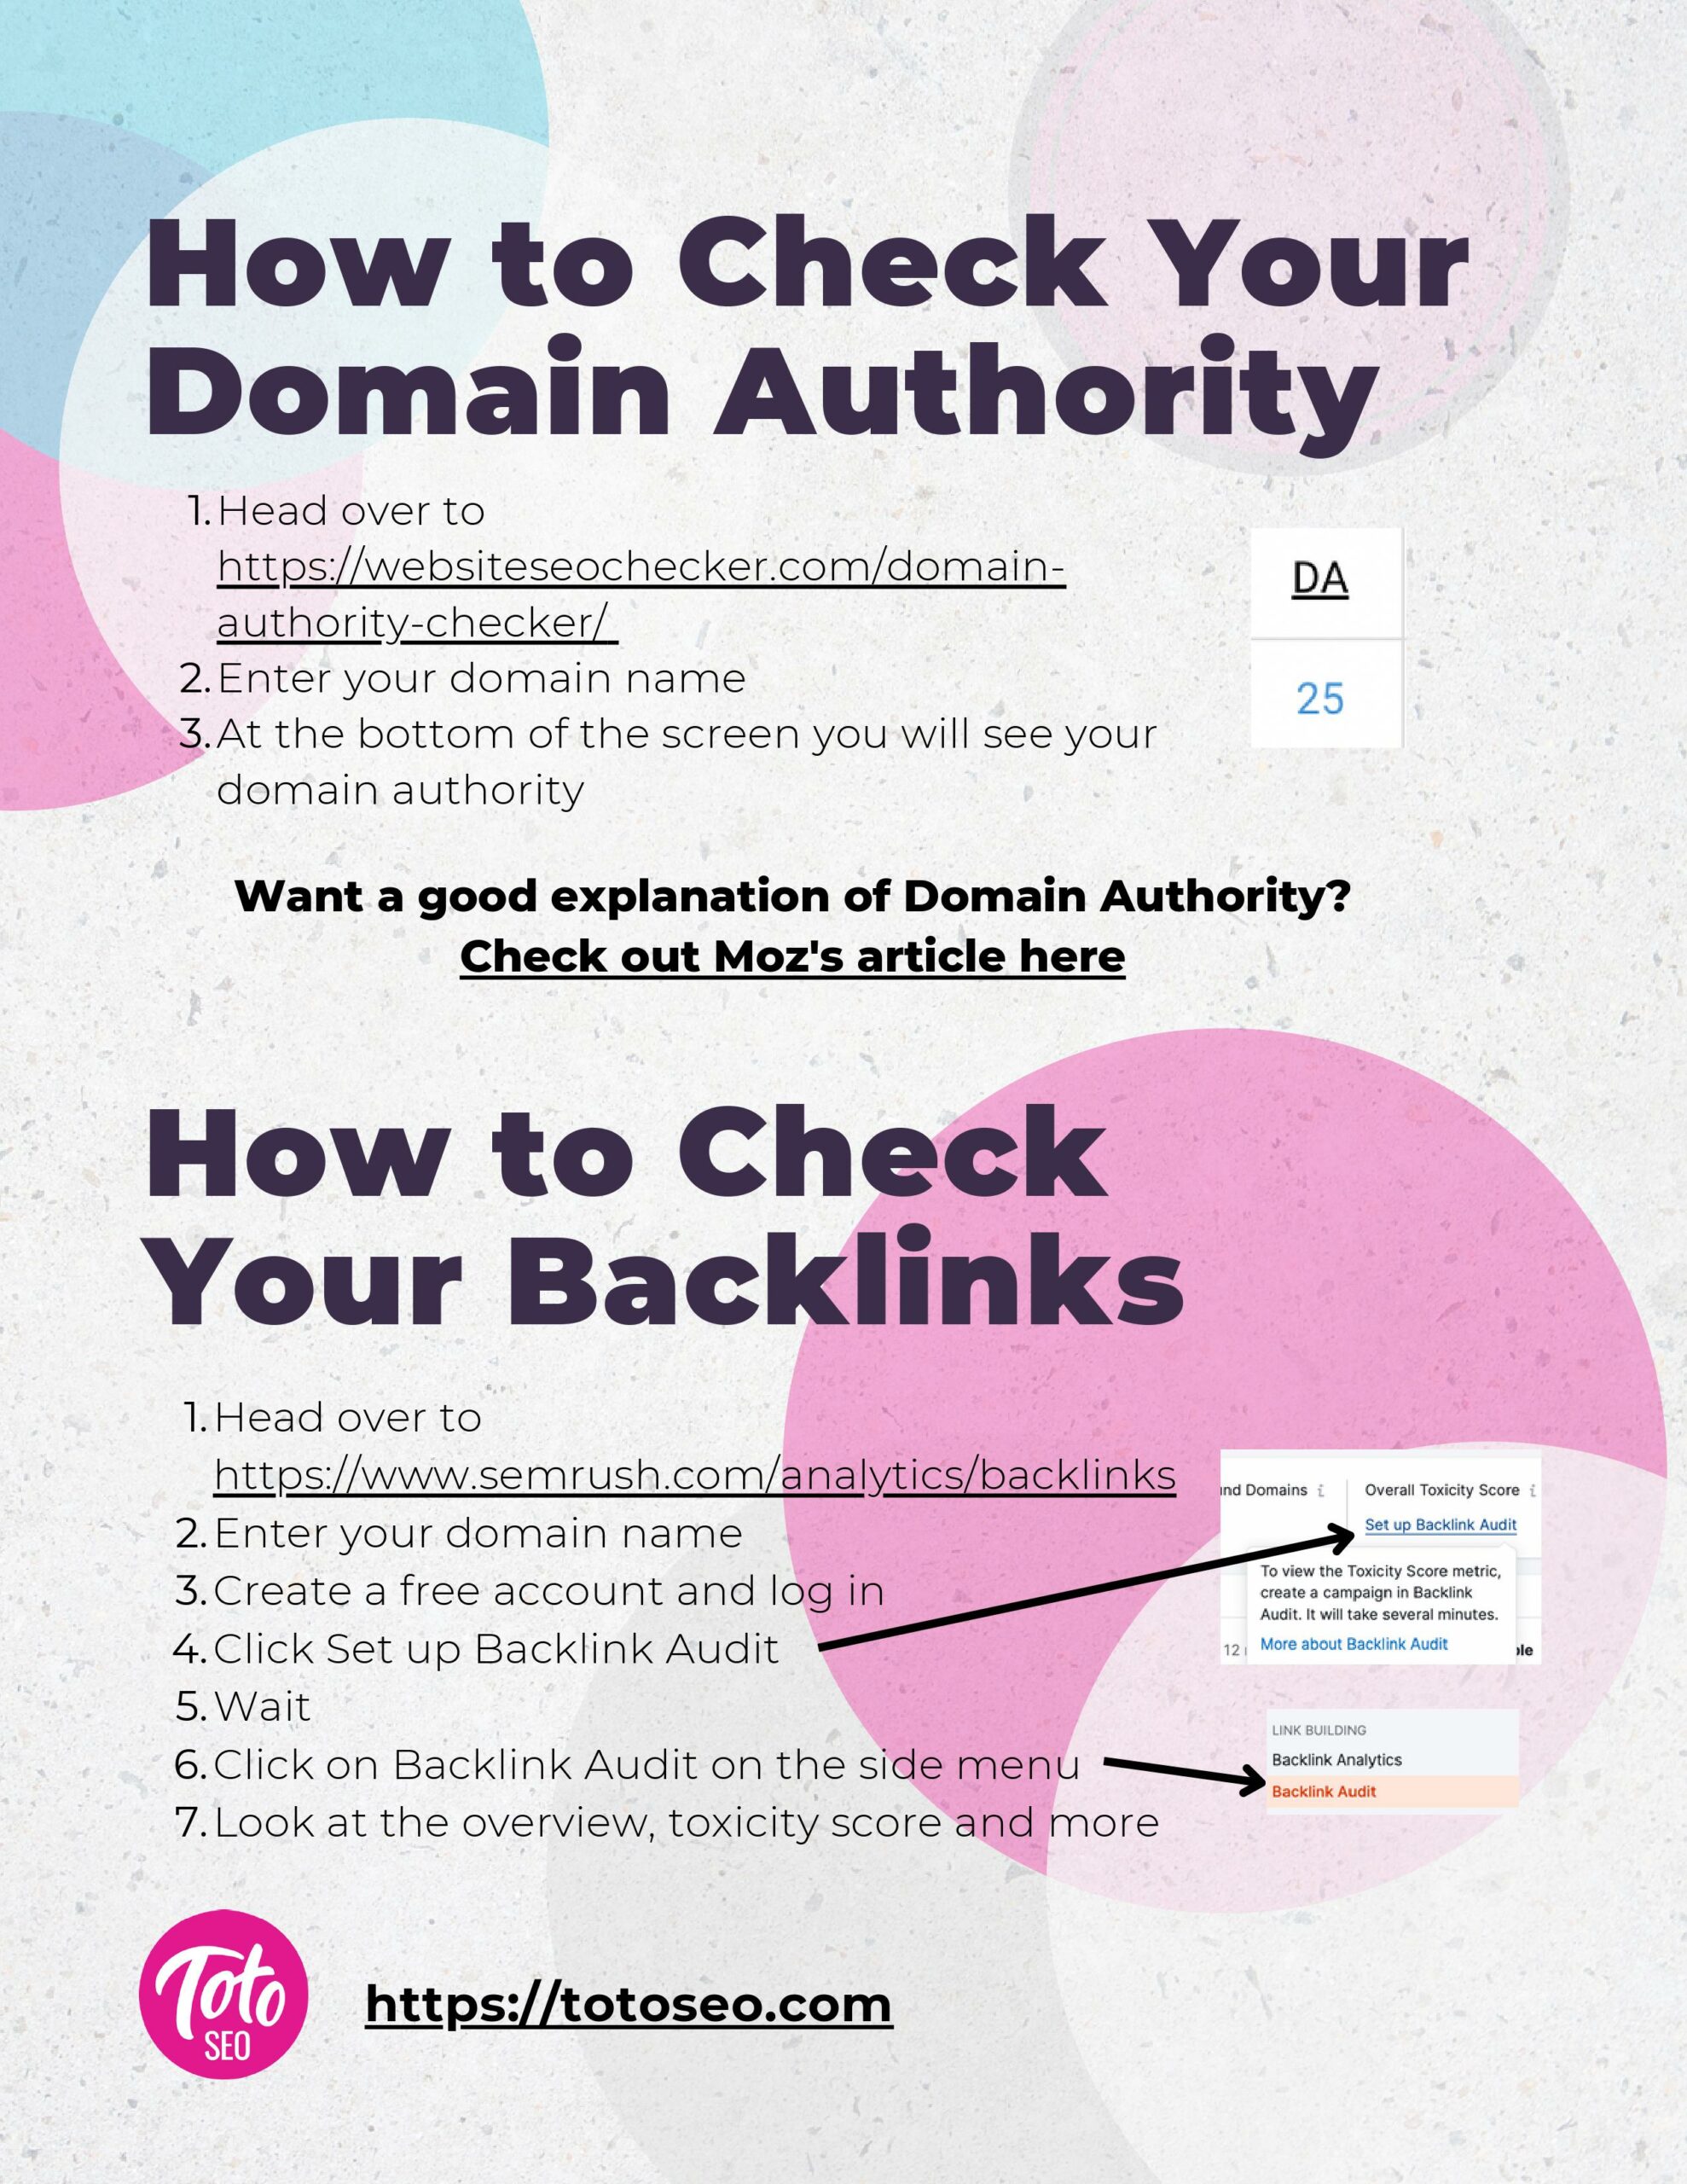 how-tocheck-your-backlinks-and-da